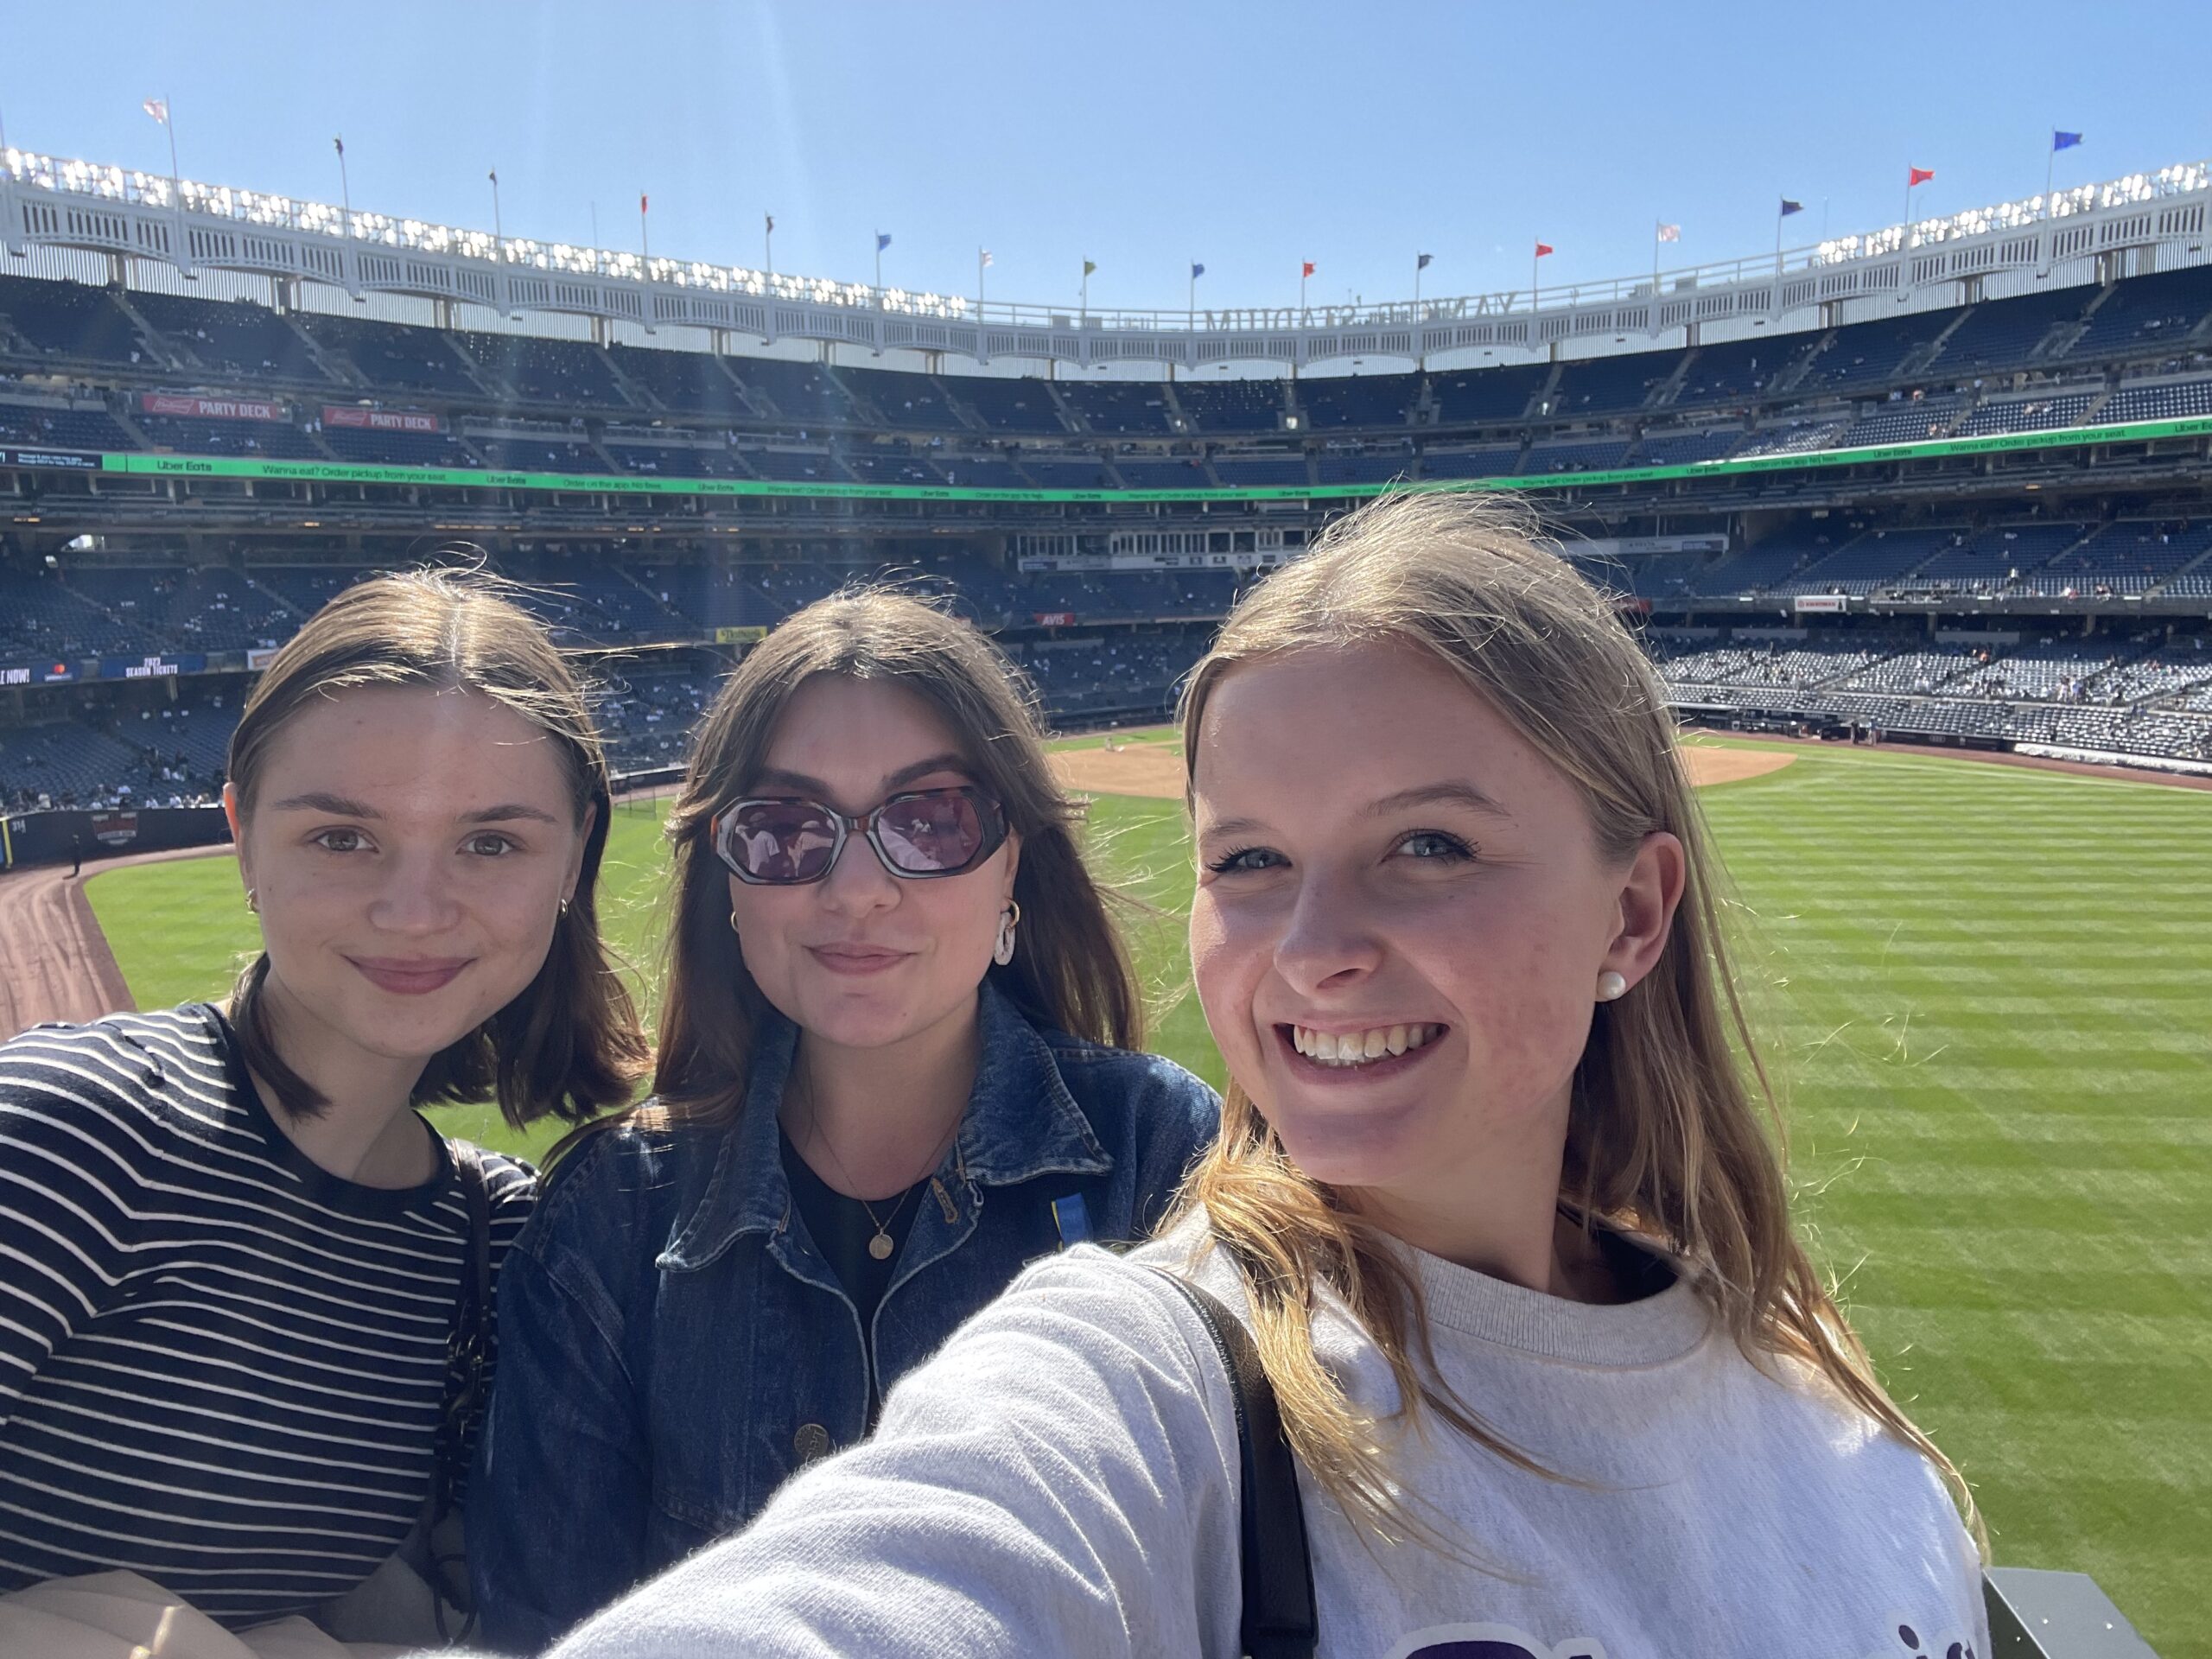 Amina and two friends pose for a selfie at Yankee Stadium